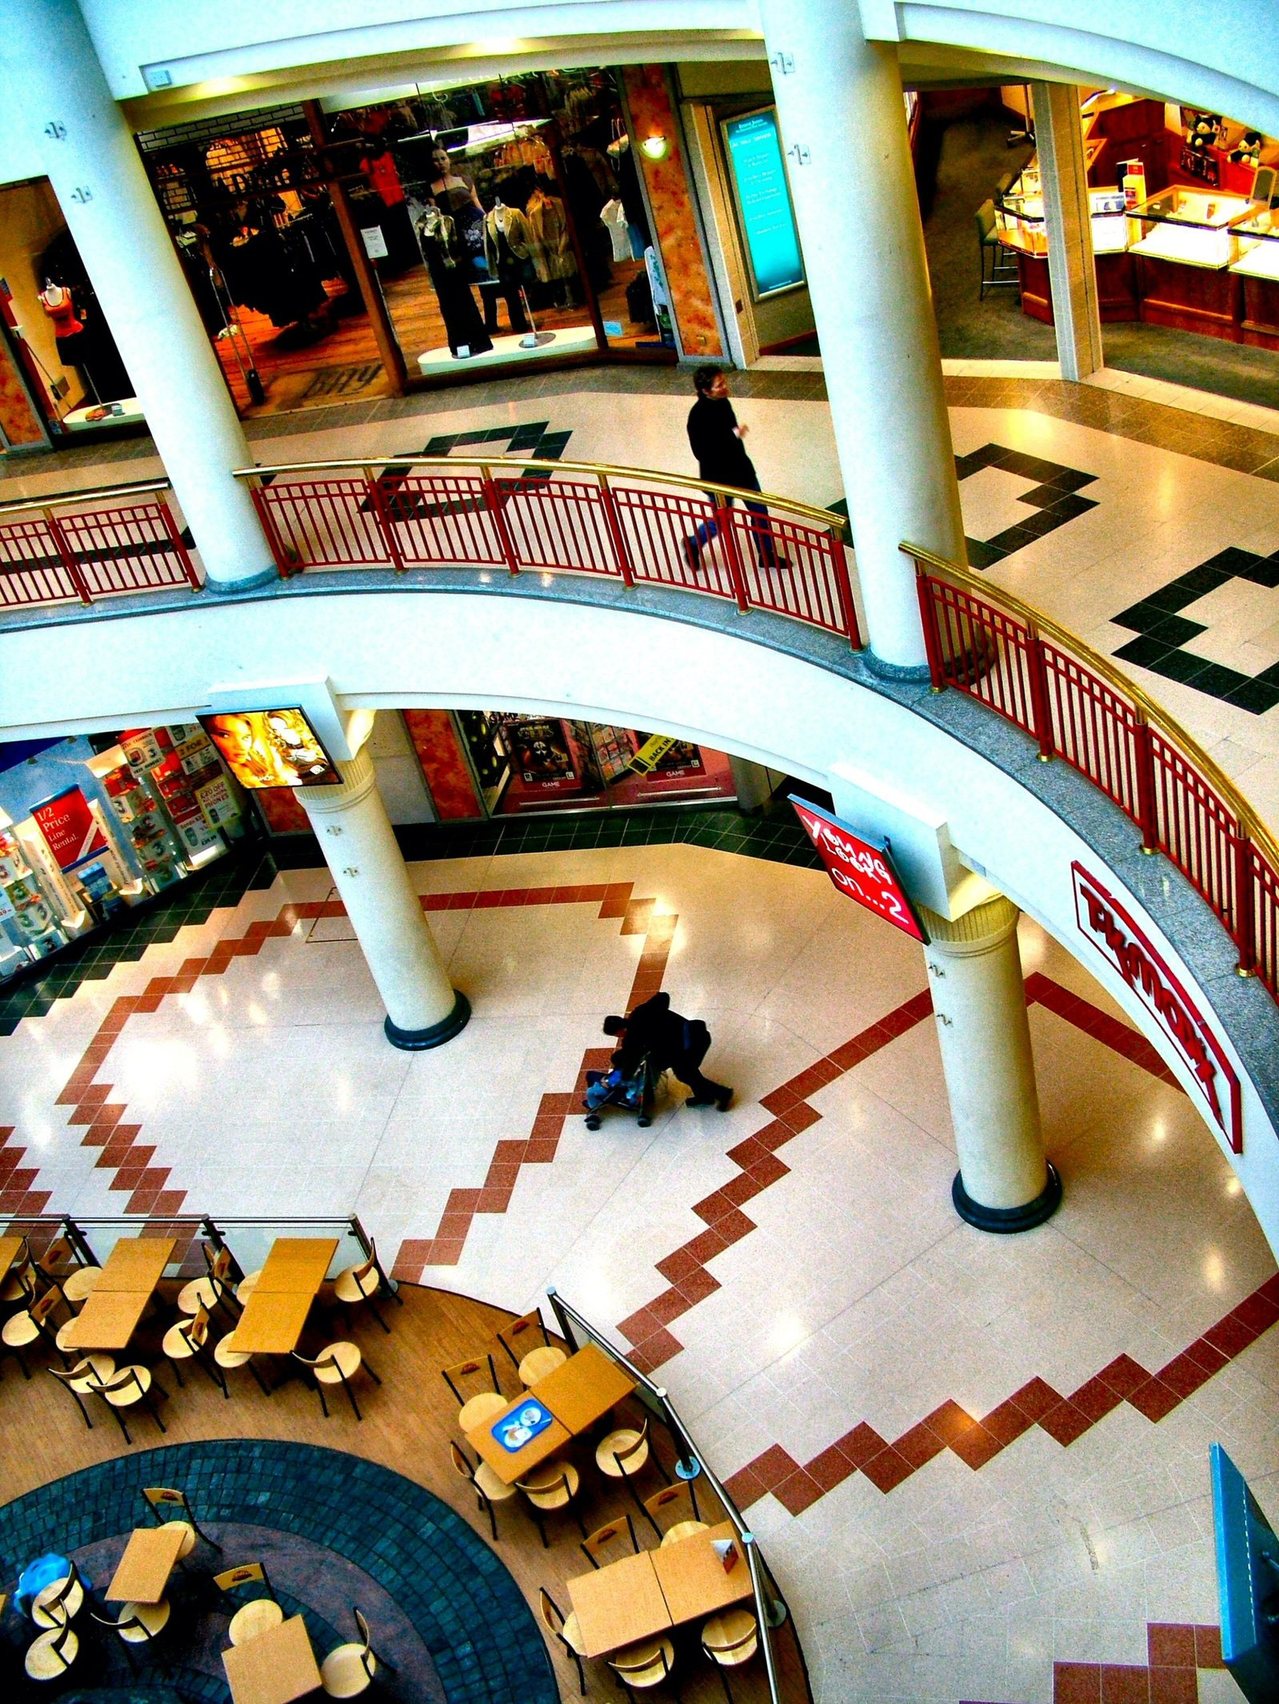 Best malls in the world